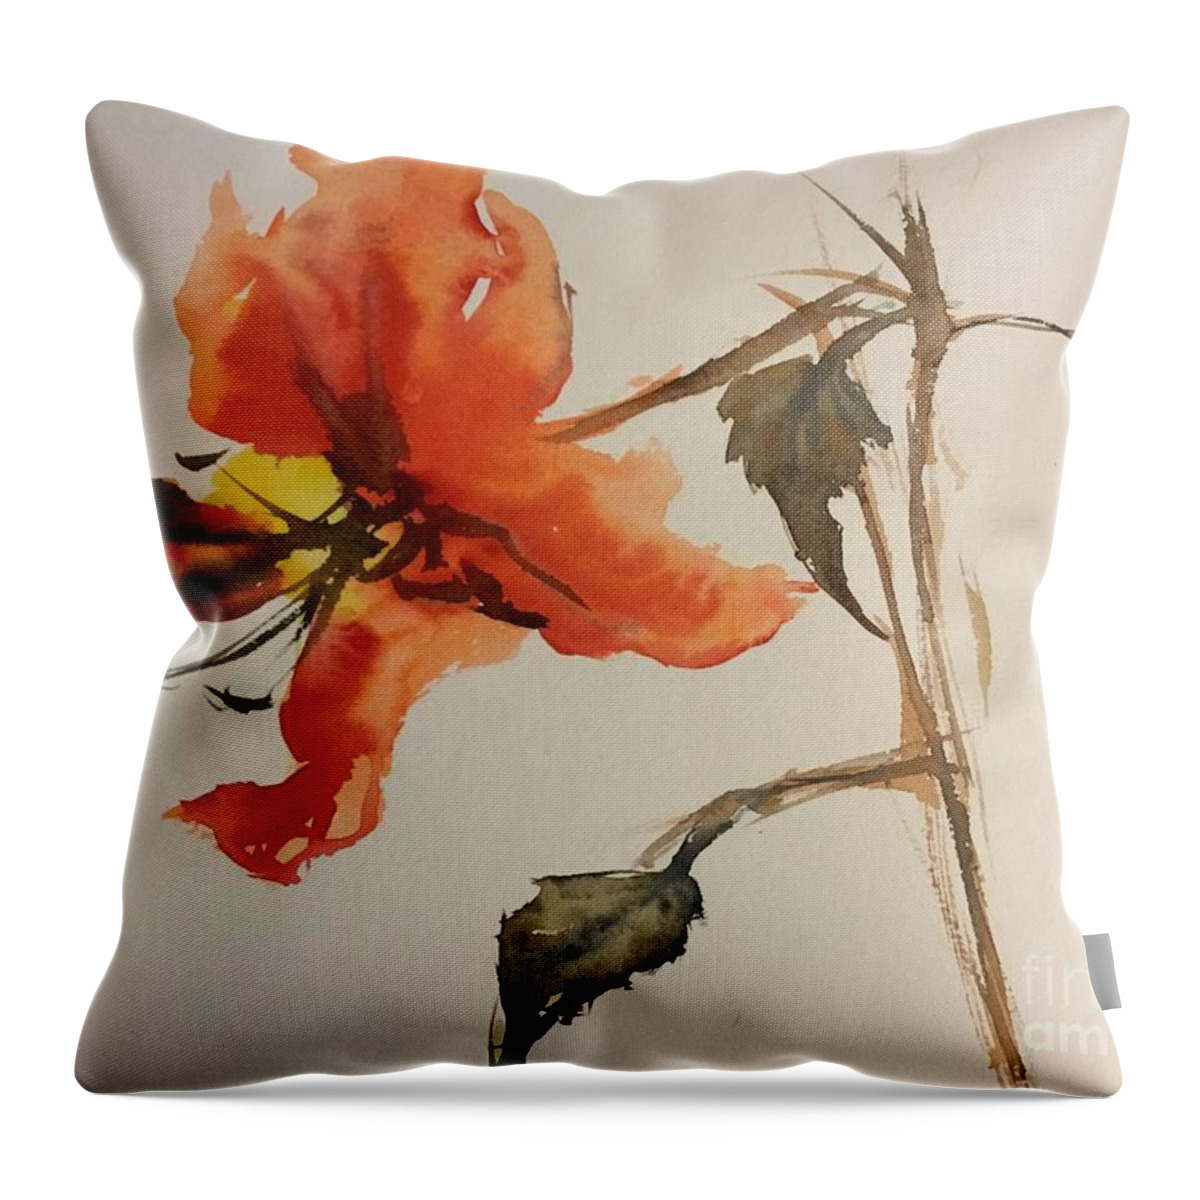 1342019 Throw Pillow featuring the painting 1342019 by Han in Huang wong